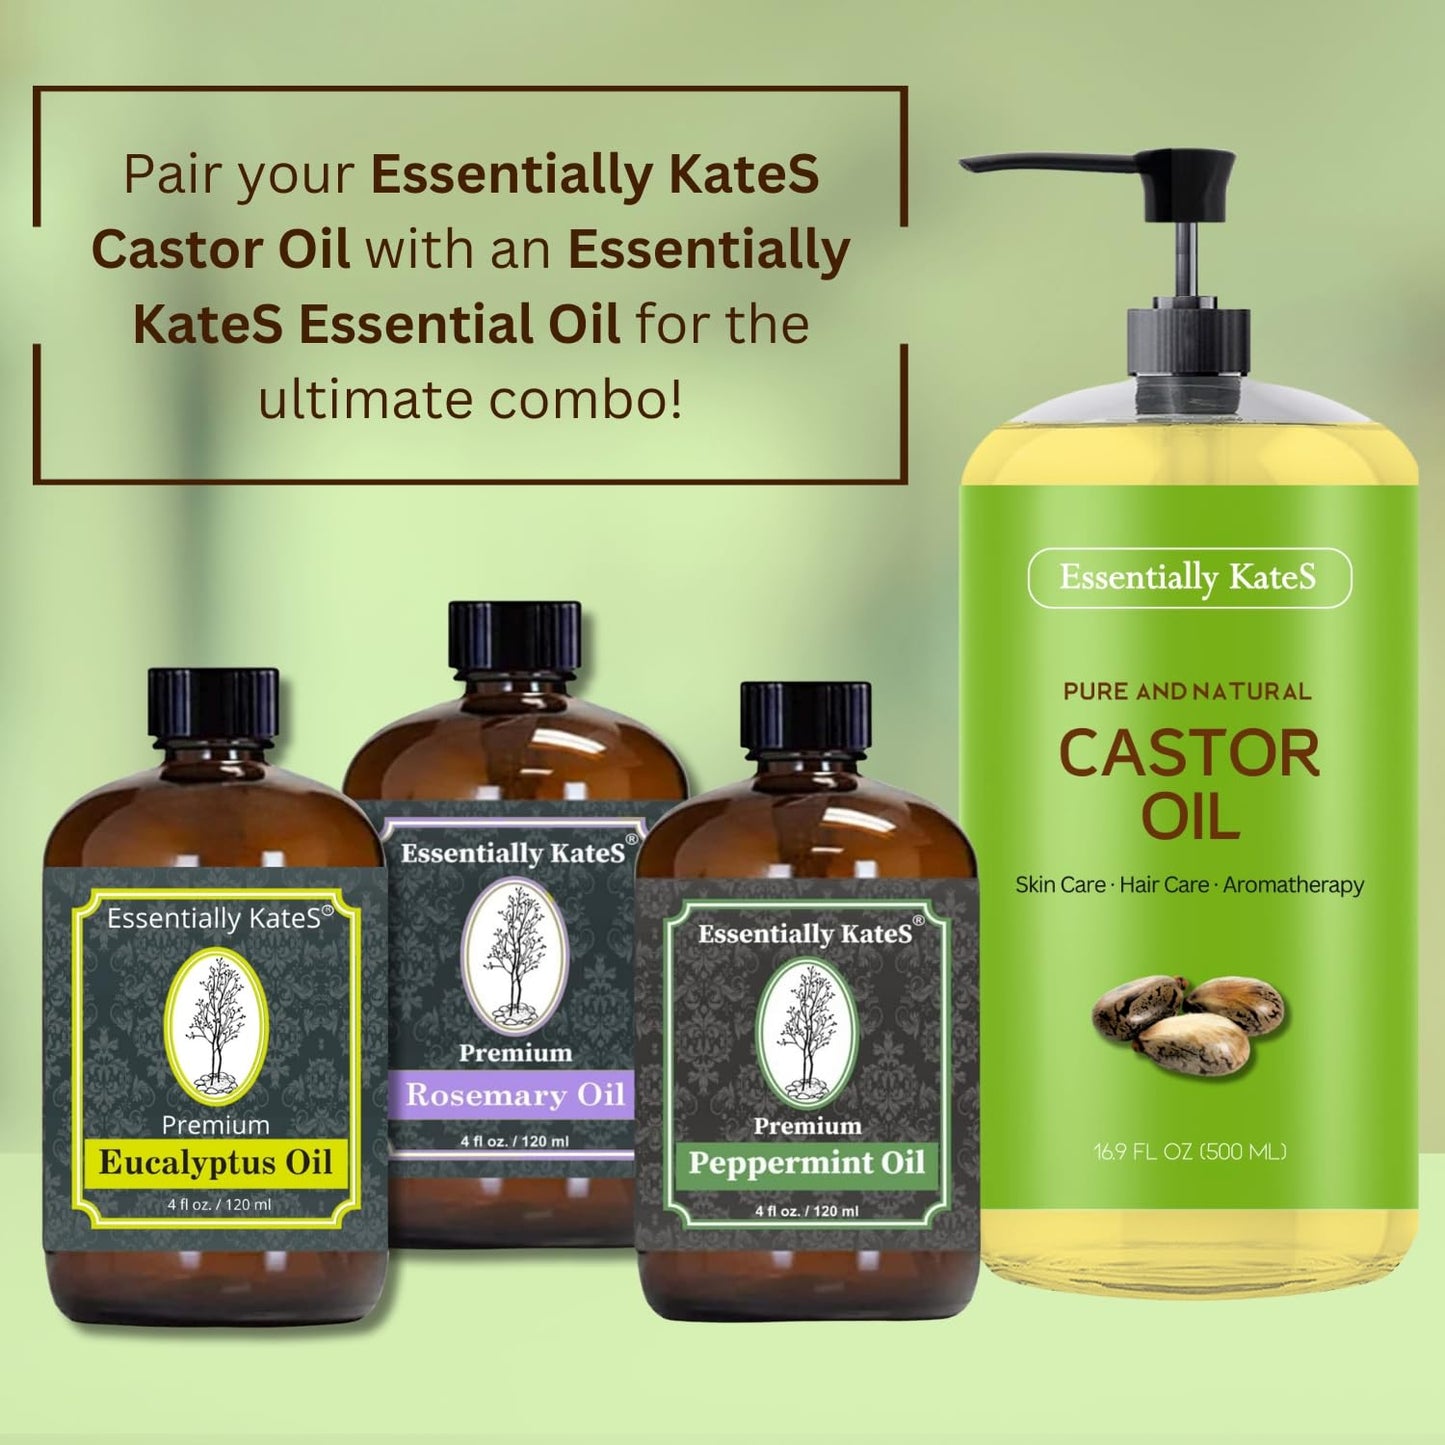 Essentially KateS Castor Oil 33.8 Fl Oz - Pack of 2 x 16.9 Fl Oz - 100% Pure and Natural and Cold Pressed